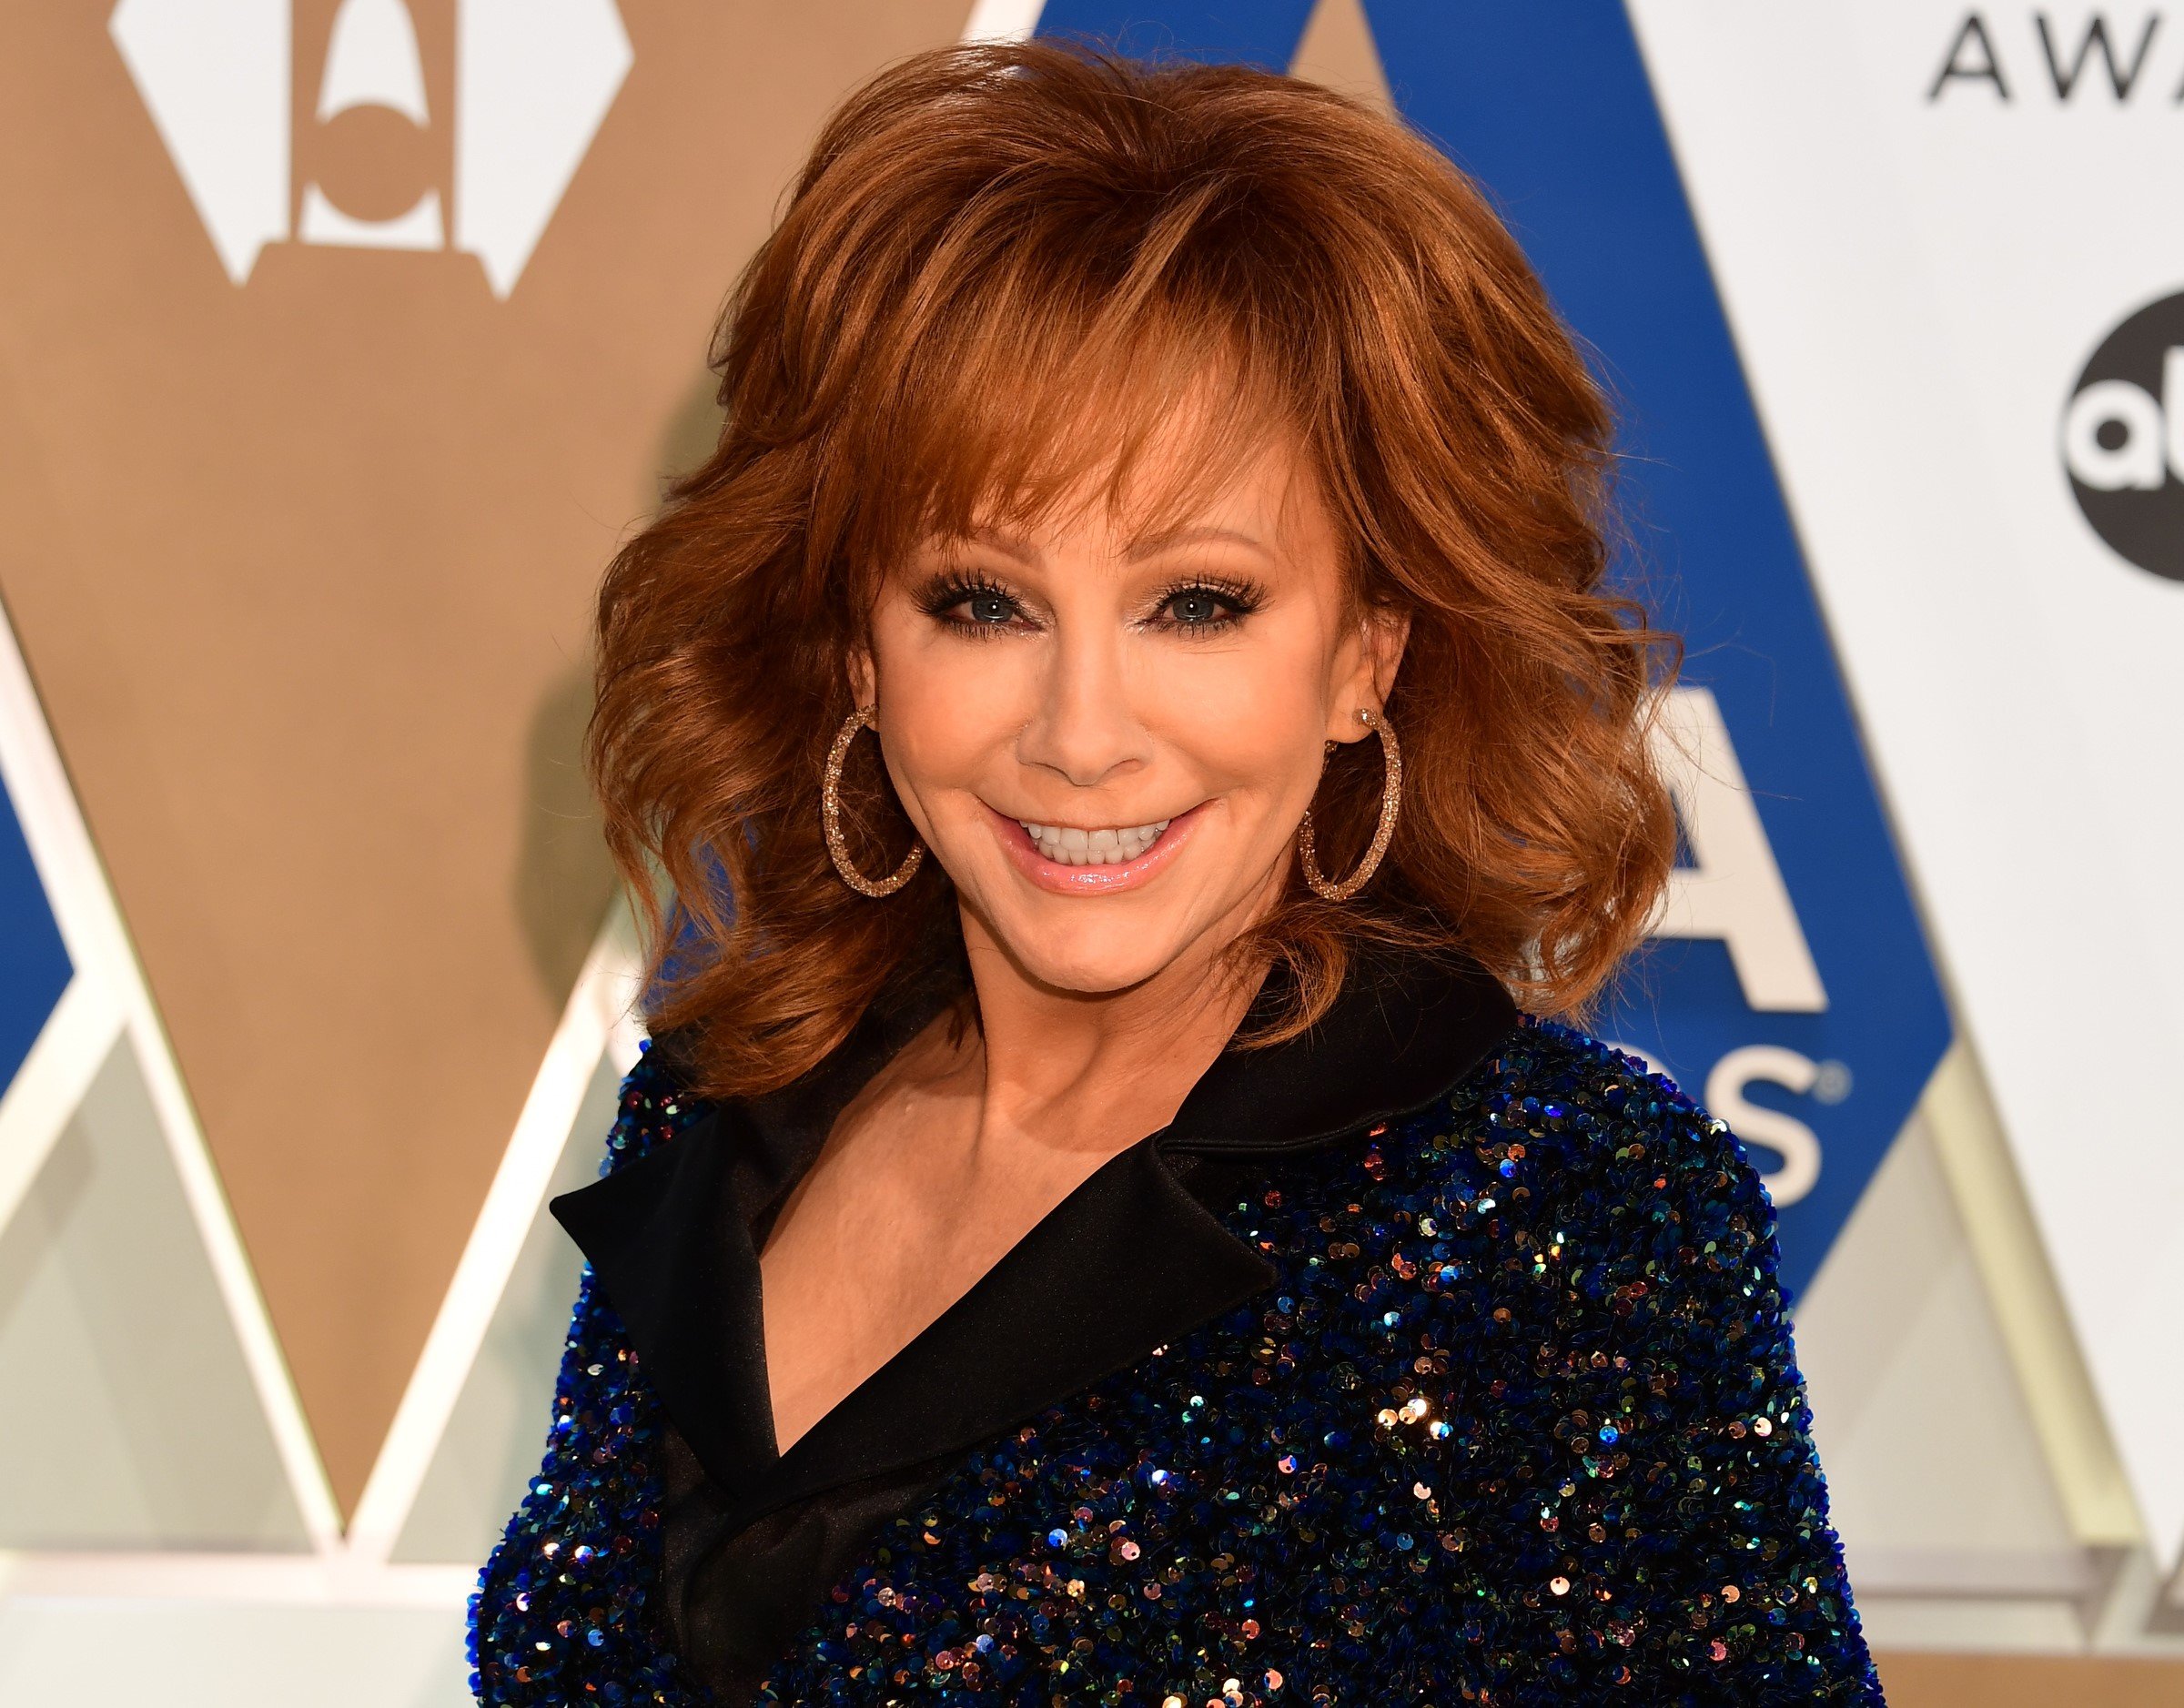 How Old Is Reba McEntire and How Many Children Does She Have?